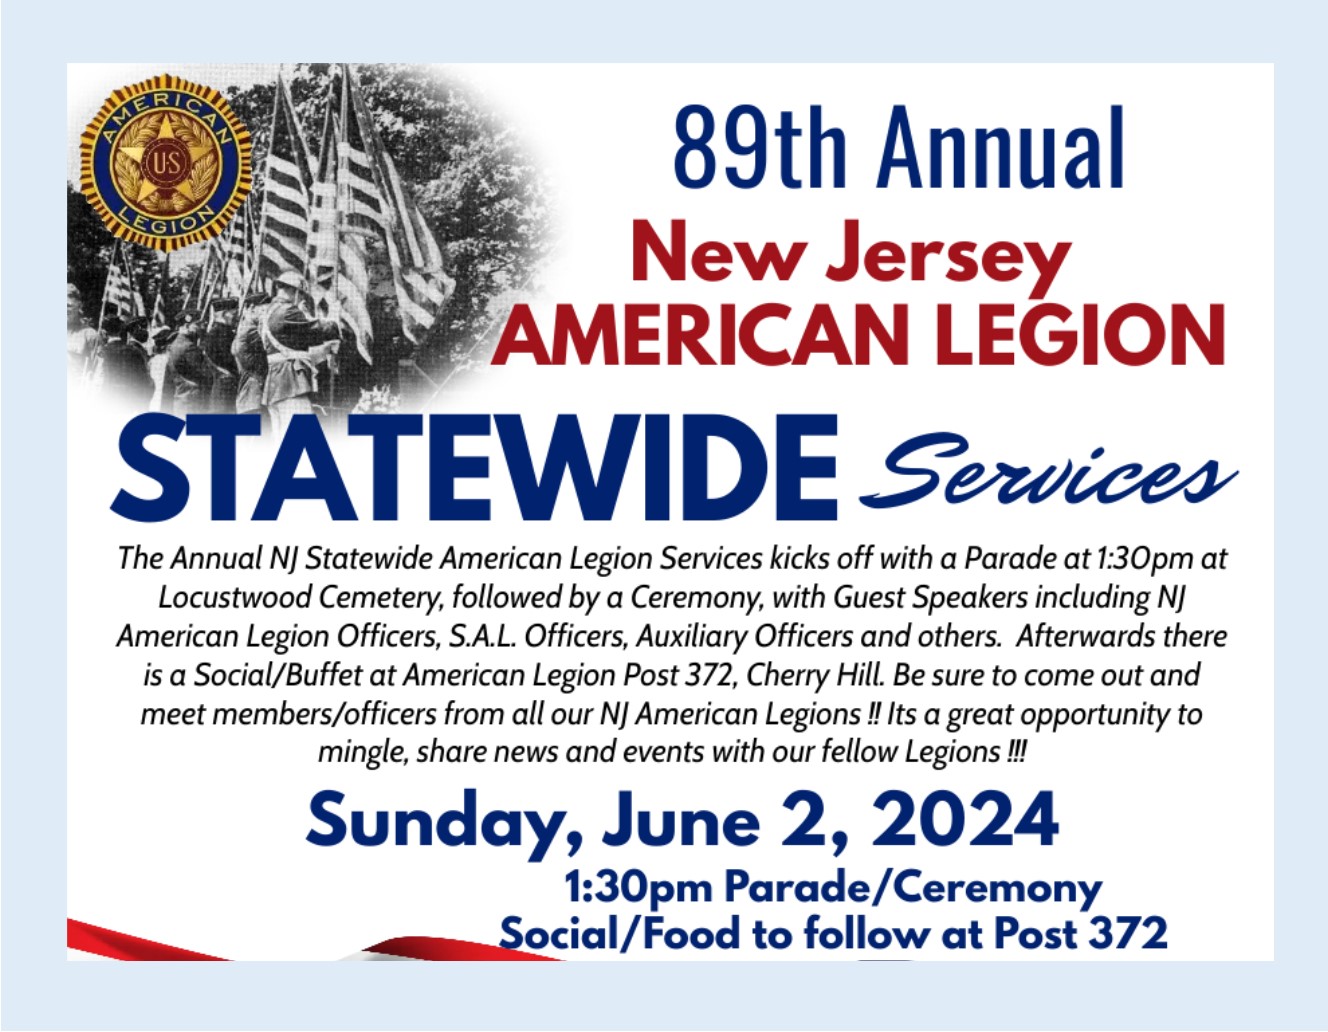 NJ American Legion Statewide Parade, Services and Social